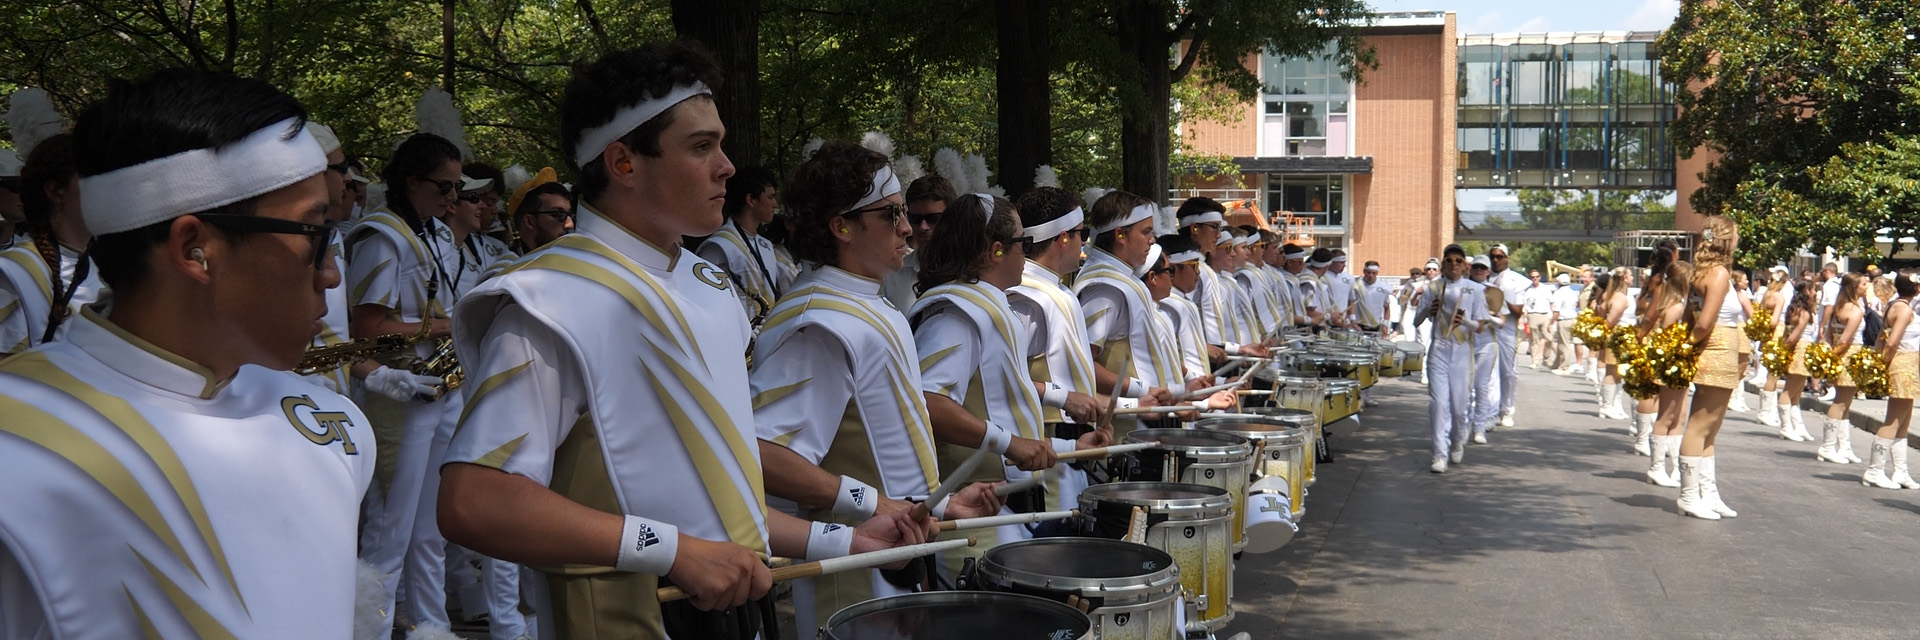 The Drumline performing in Yellow Jacket alley.